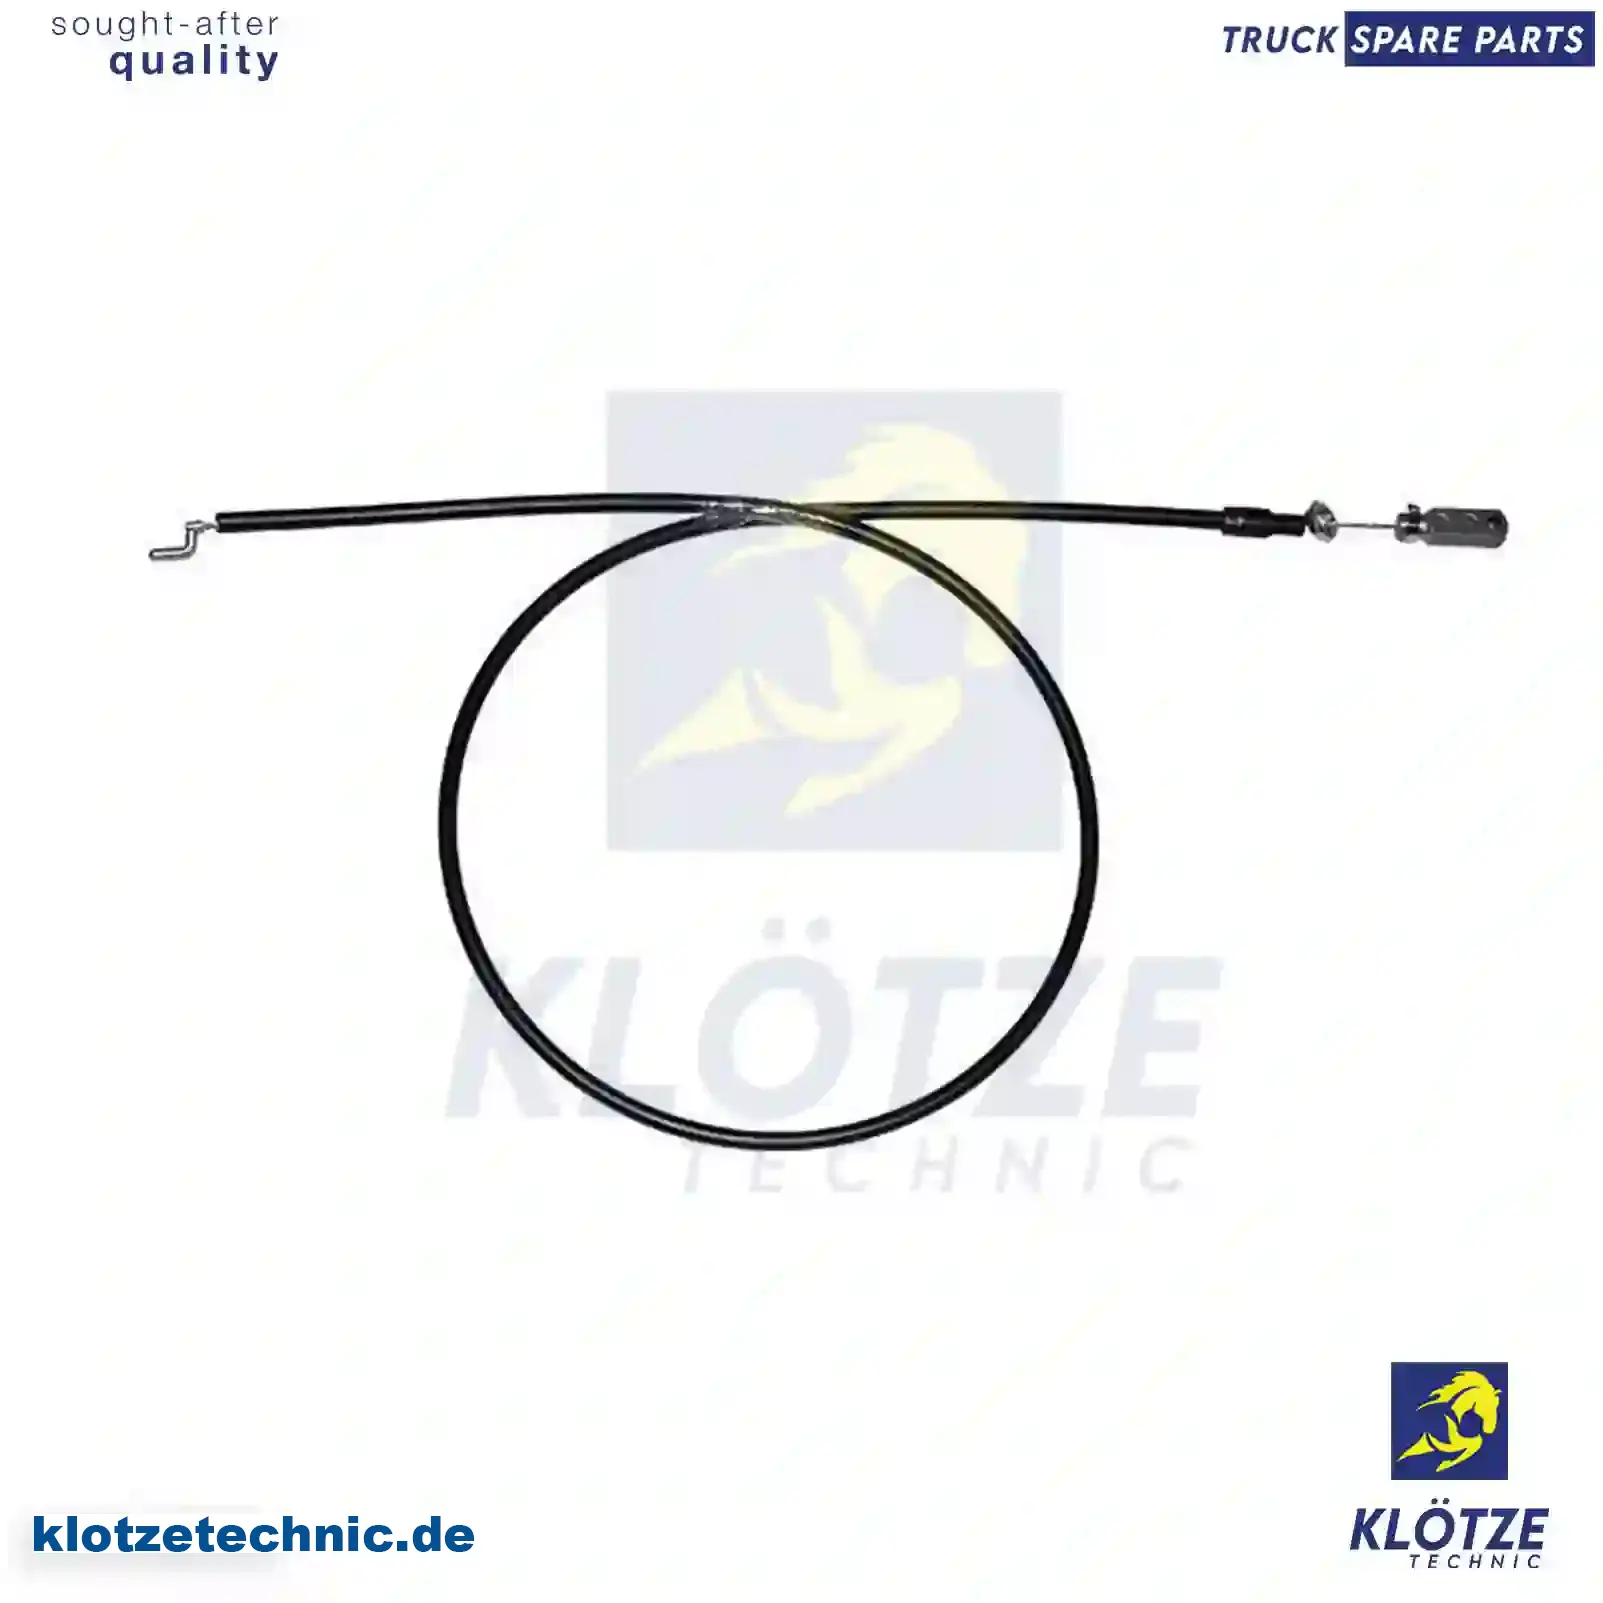 Control wire, front flap, 1391364, ZG60424-0008